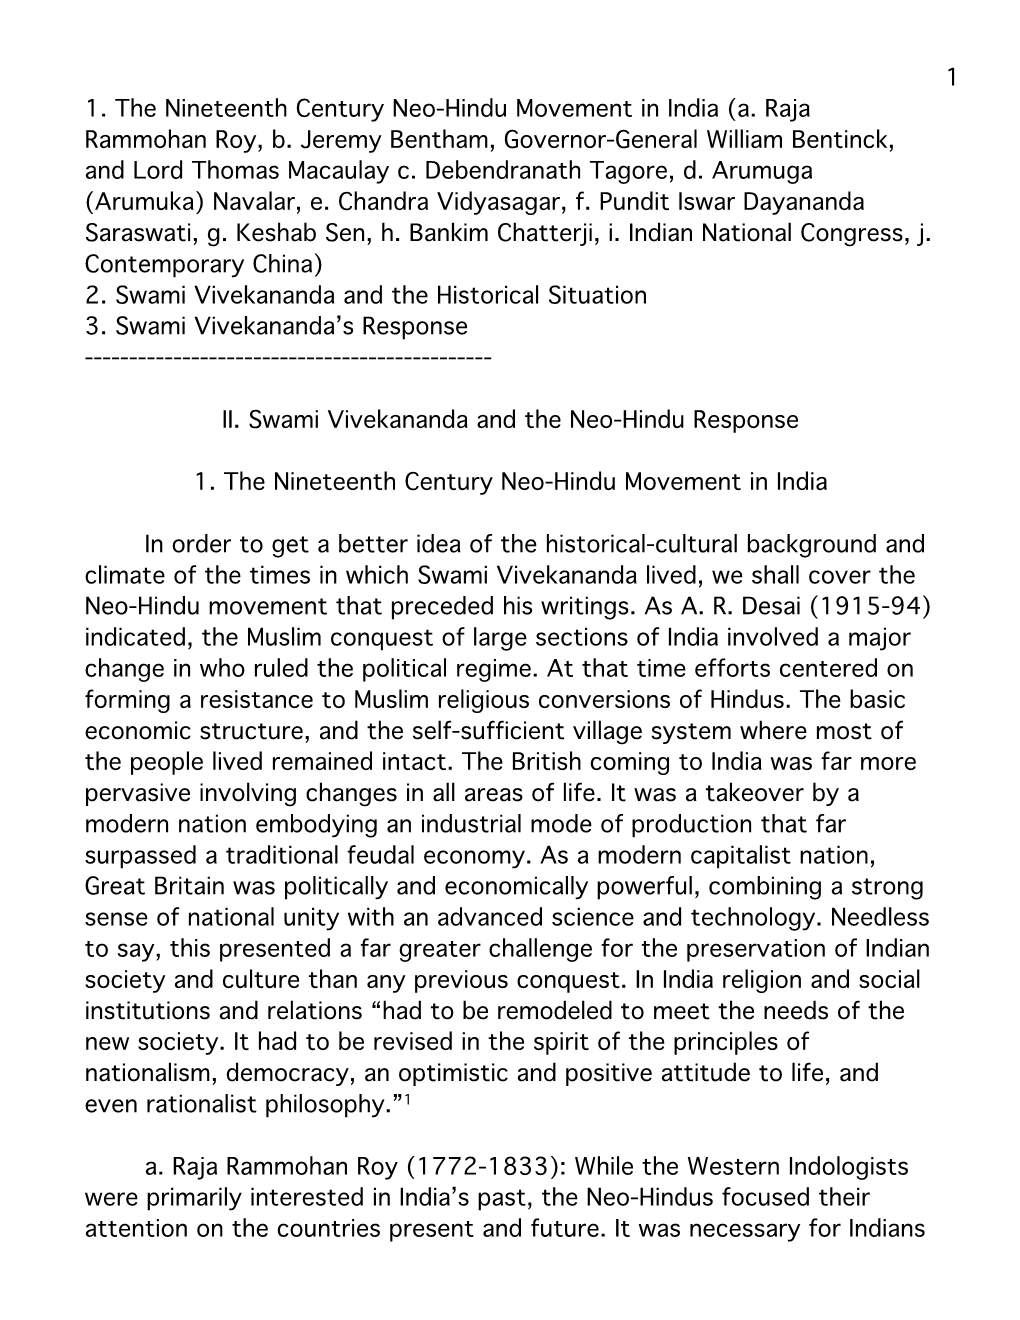 1 1. the Nineteenth Century Neo-Hindu Movement in India (A